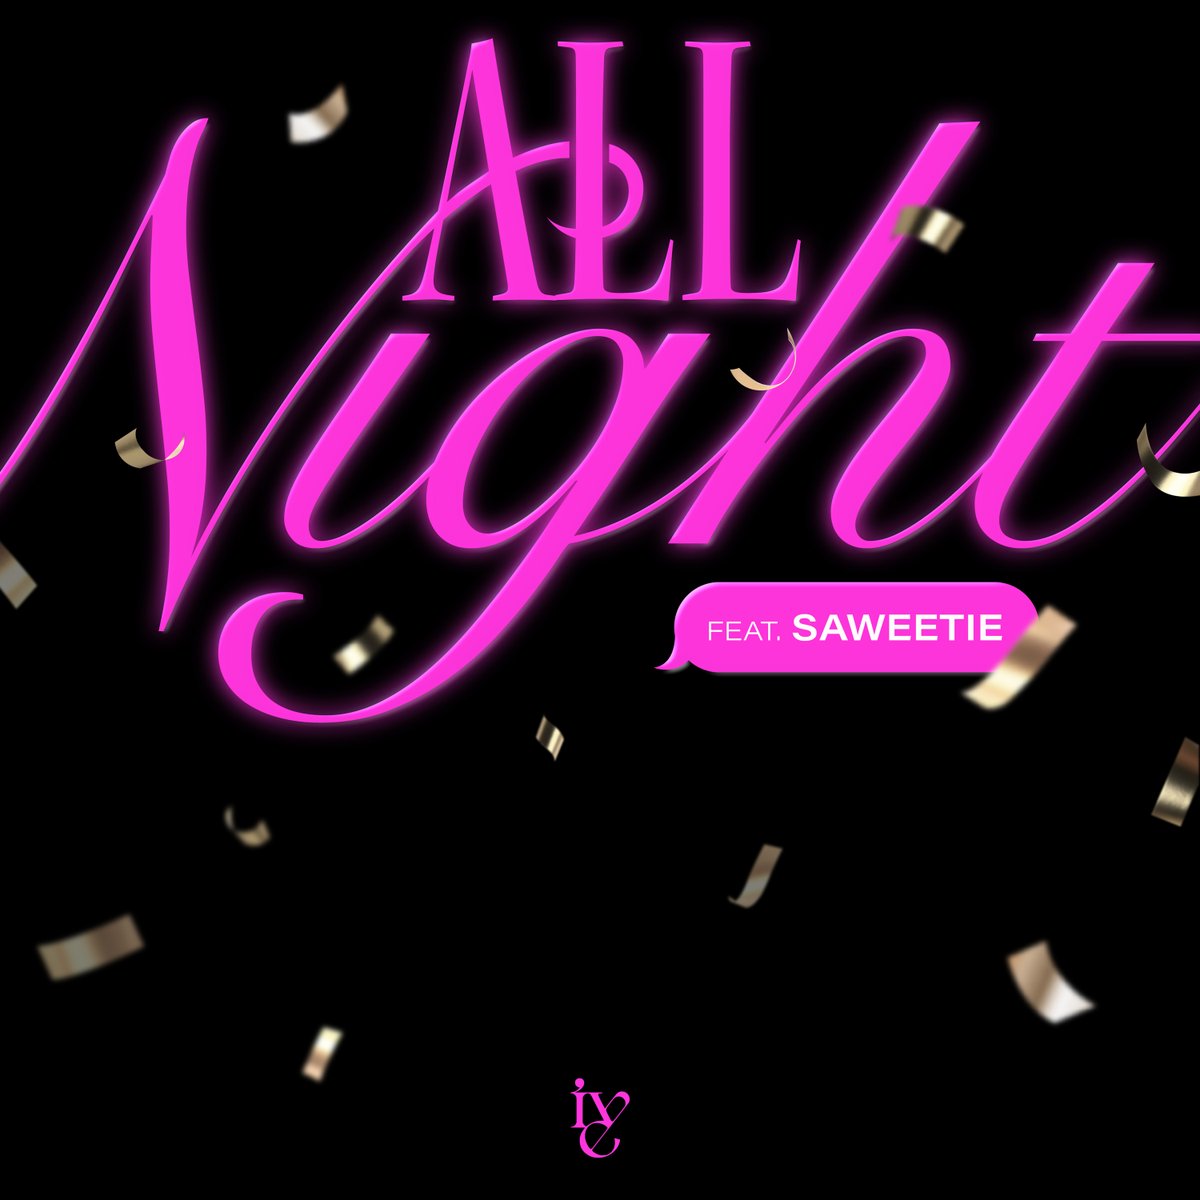 Our new song “All Night” featuring @Saweetie is out January 18th at 7pm ET / January 19th at 9am KST! We’re so excited for our first English single & have had a great time working with Saweetie! Can’t wait for everyone to hear it ❤ Pre-save & pre-order at the link in our bio!